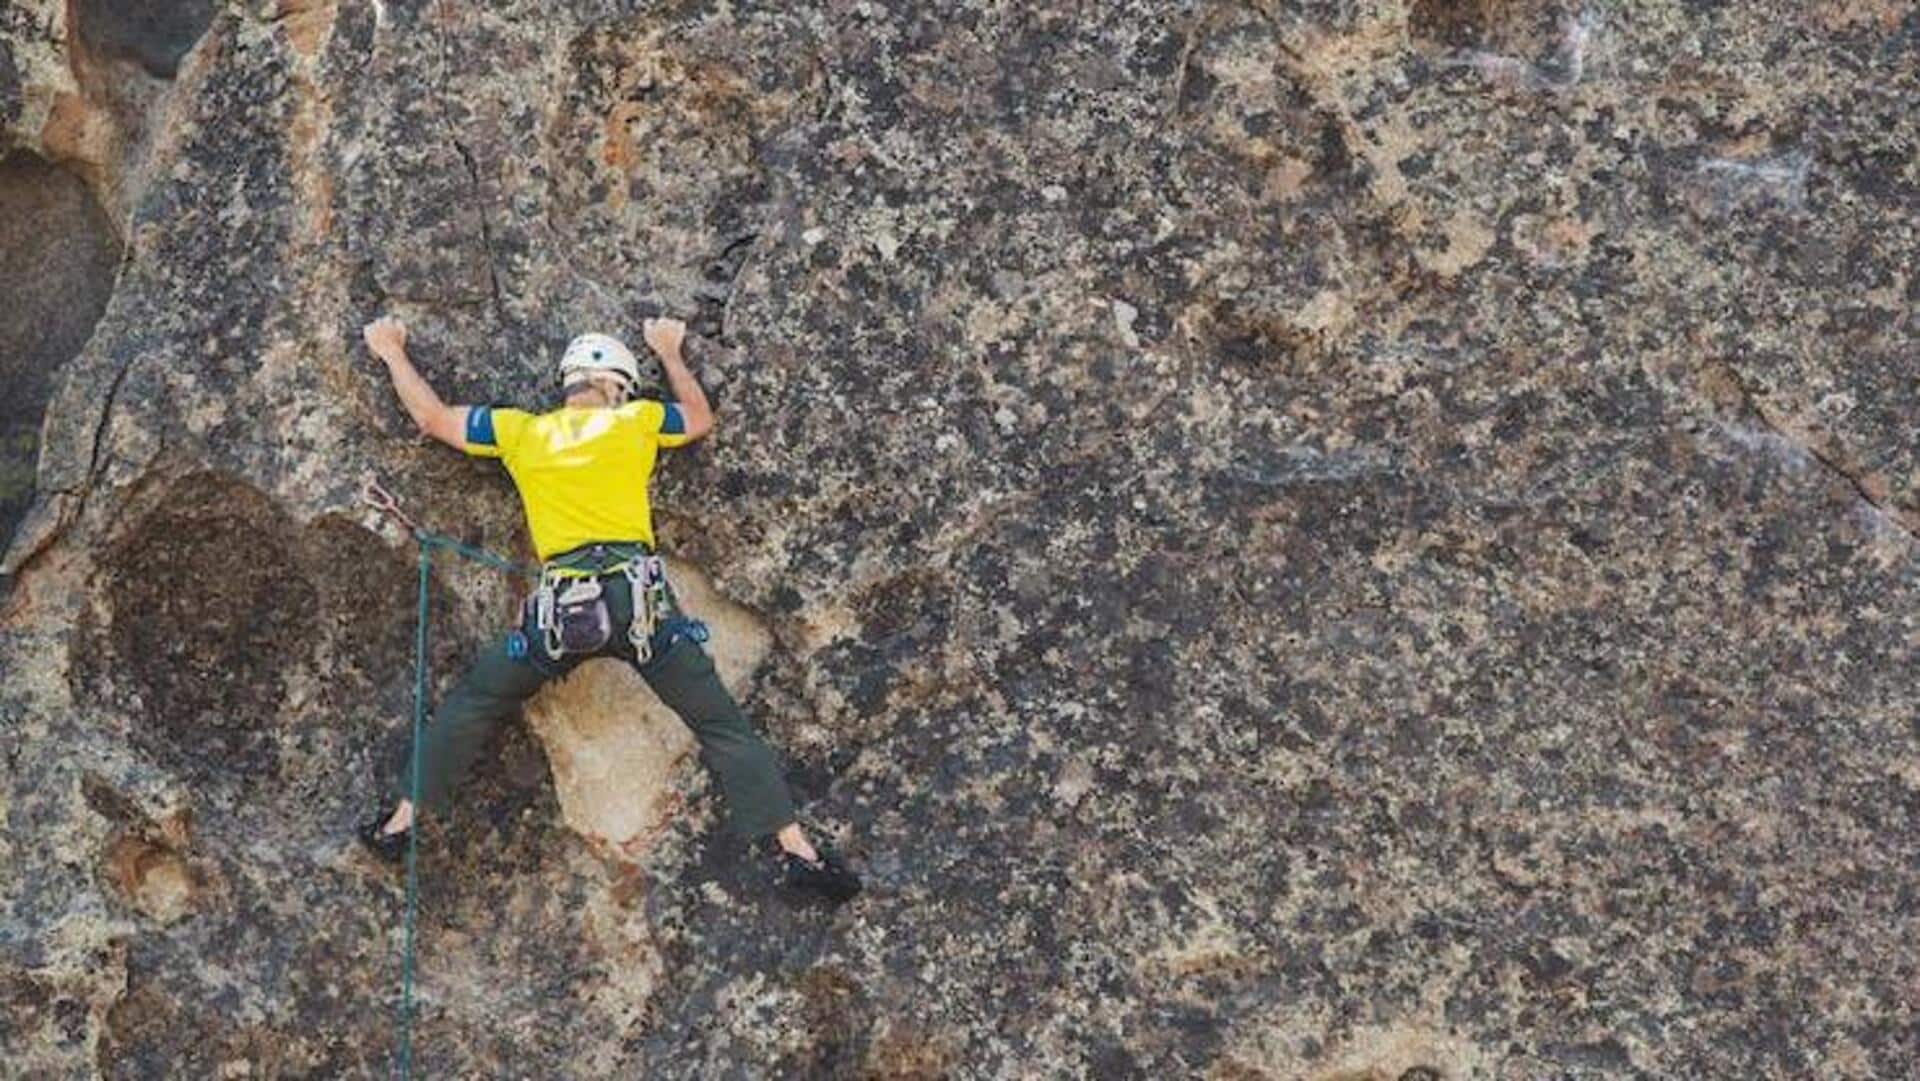 Check out the world's top rock climbing destinations